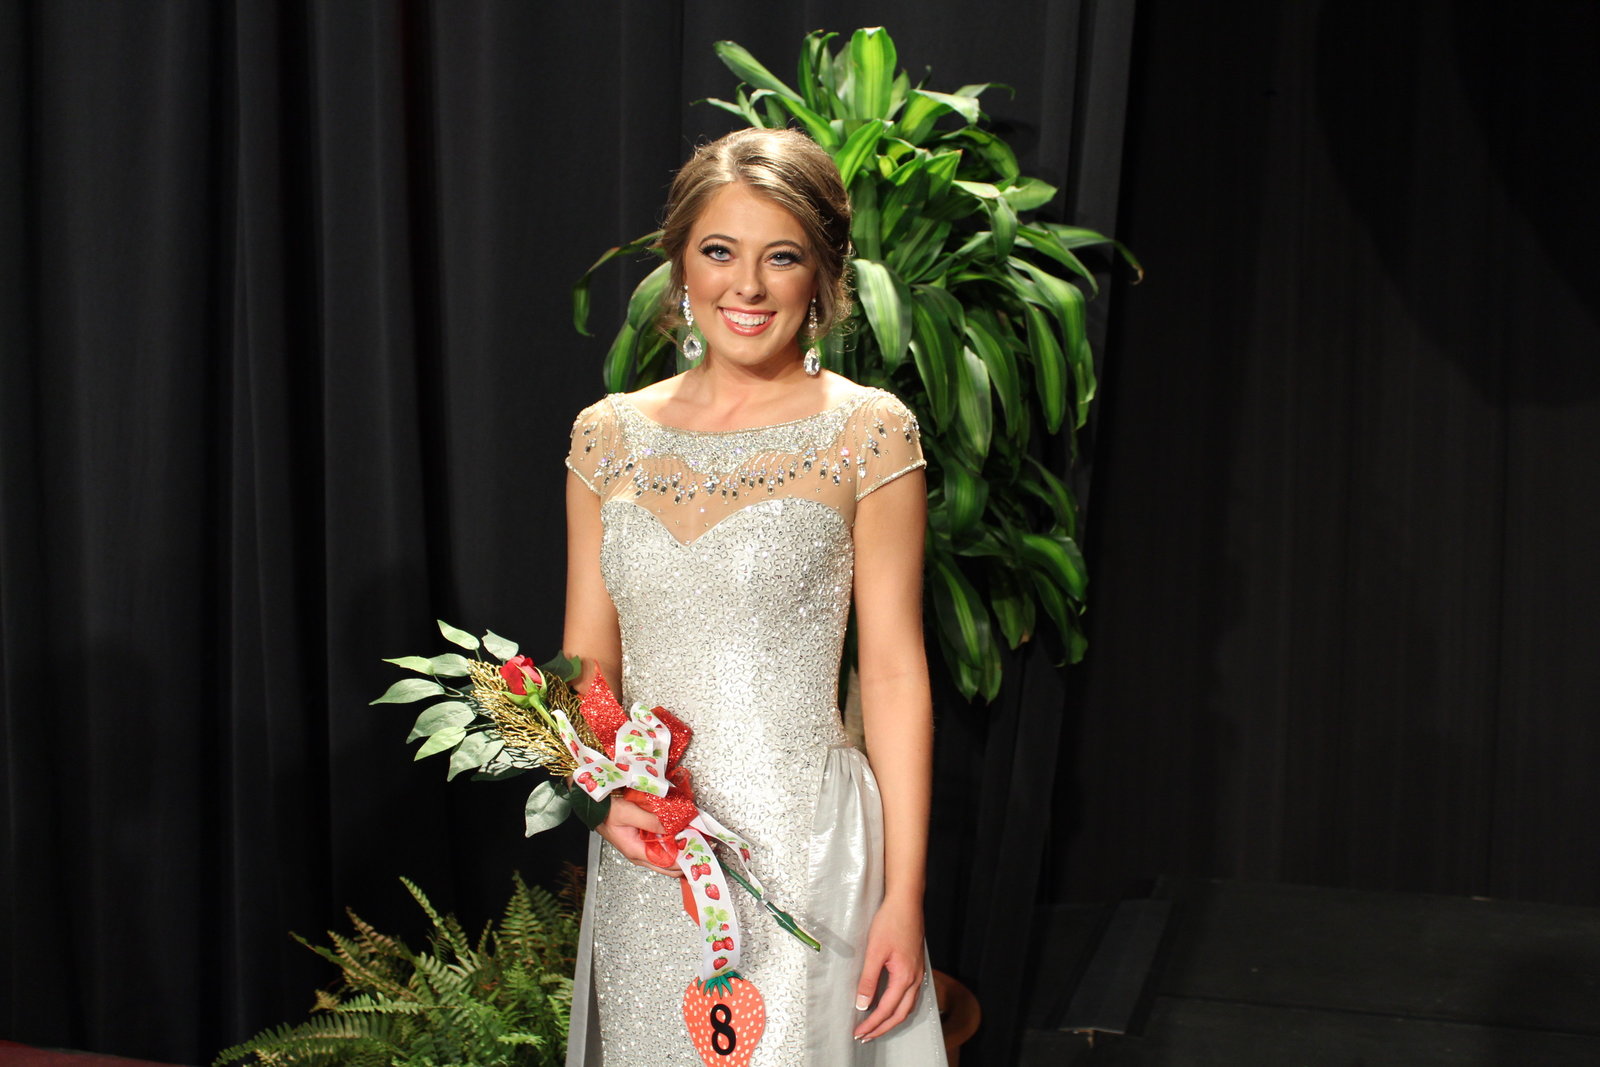 West Tennessee Strawberry Festival - Humboldt TN - Pageant - Main Terr39